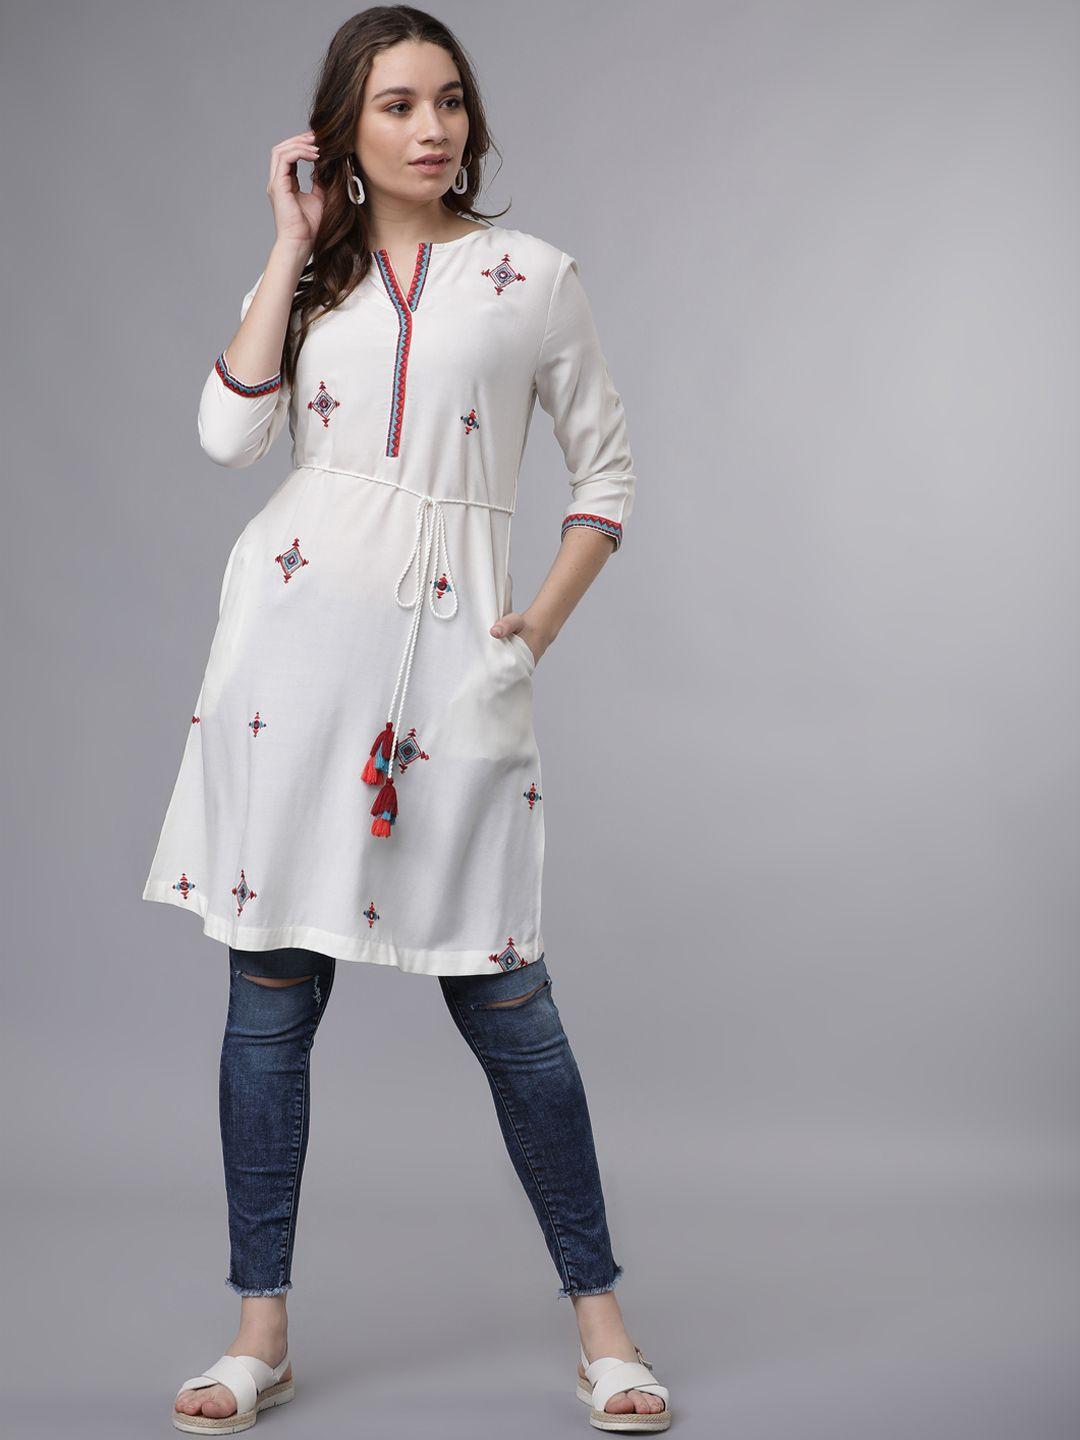 vishudh women's white & red embroidered tunic